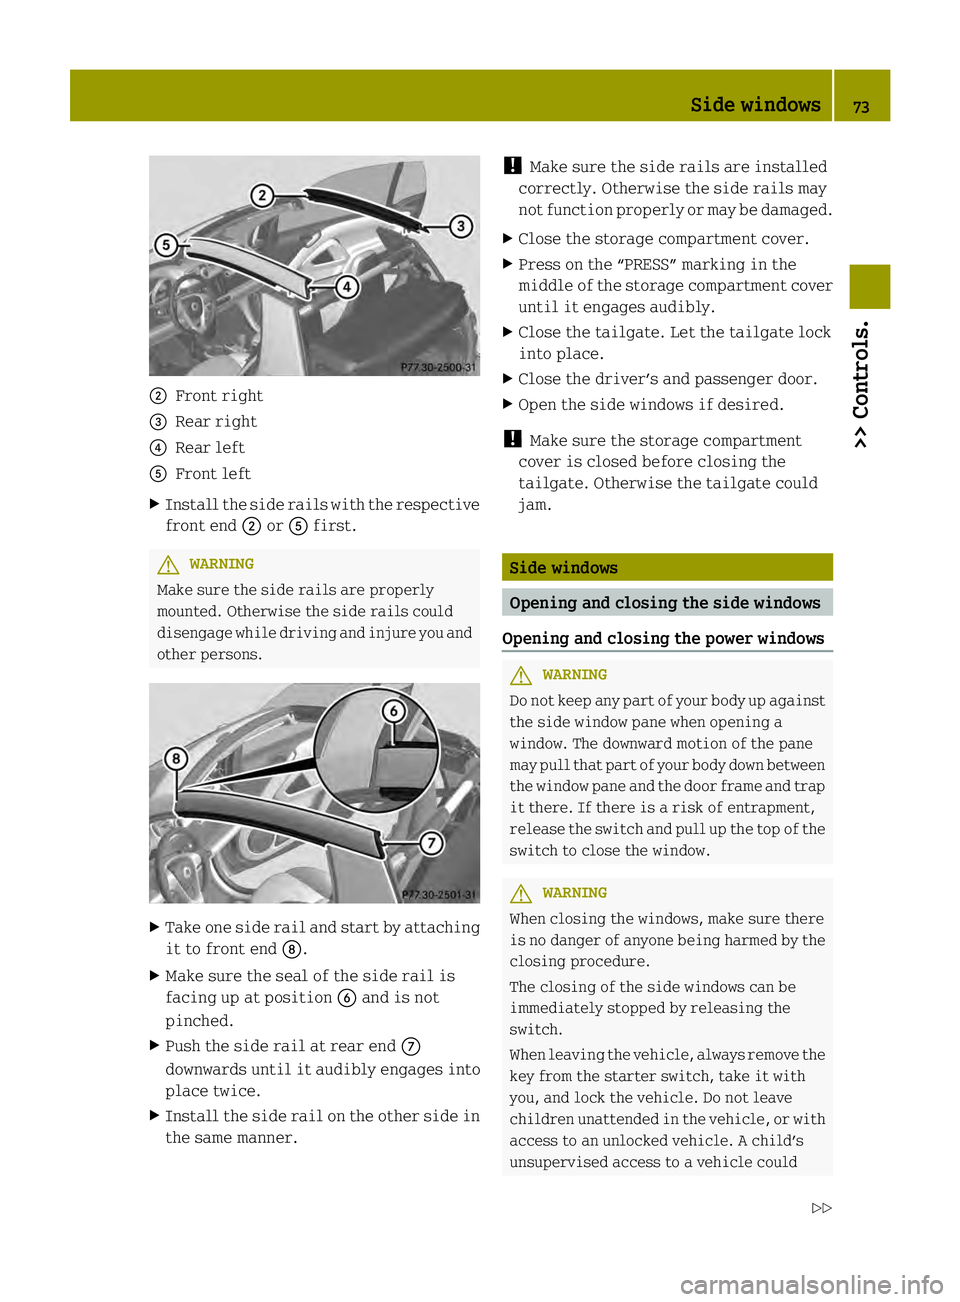 SMART FORTWO COUPE ELECTRIC DRIVE 2013 Manual PDF 0003
Front right
002B Rear right
002A Rear left
0028 Front left
X Install the side rails with the respective
front end 0003or0028 first. G
WARNING
Make sure the side rails are properly
mounted. Otherw